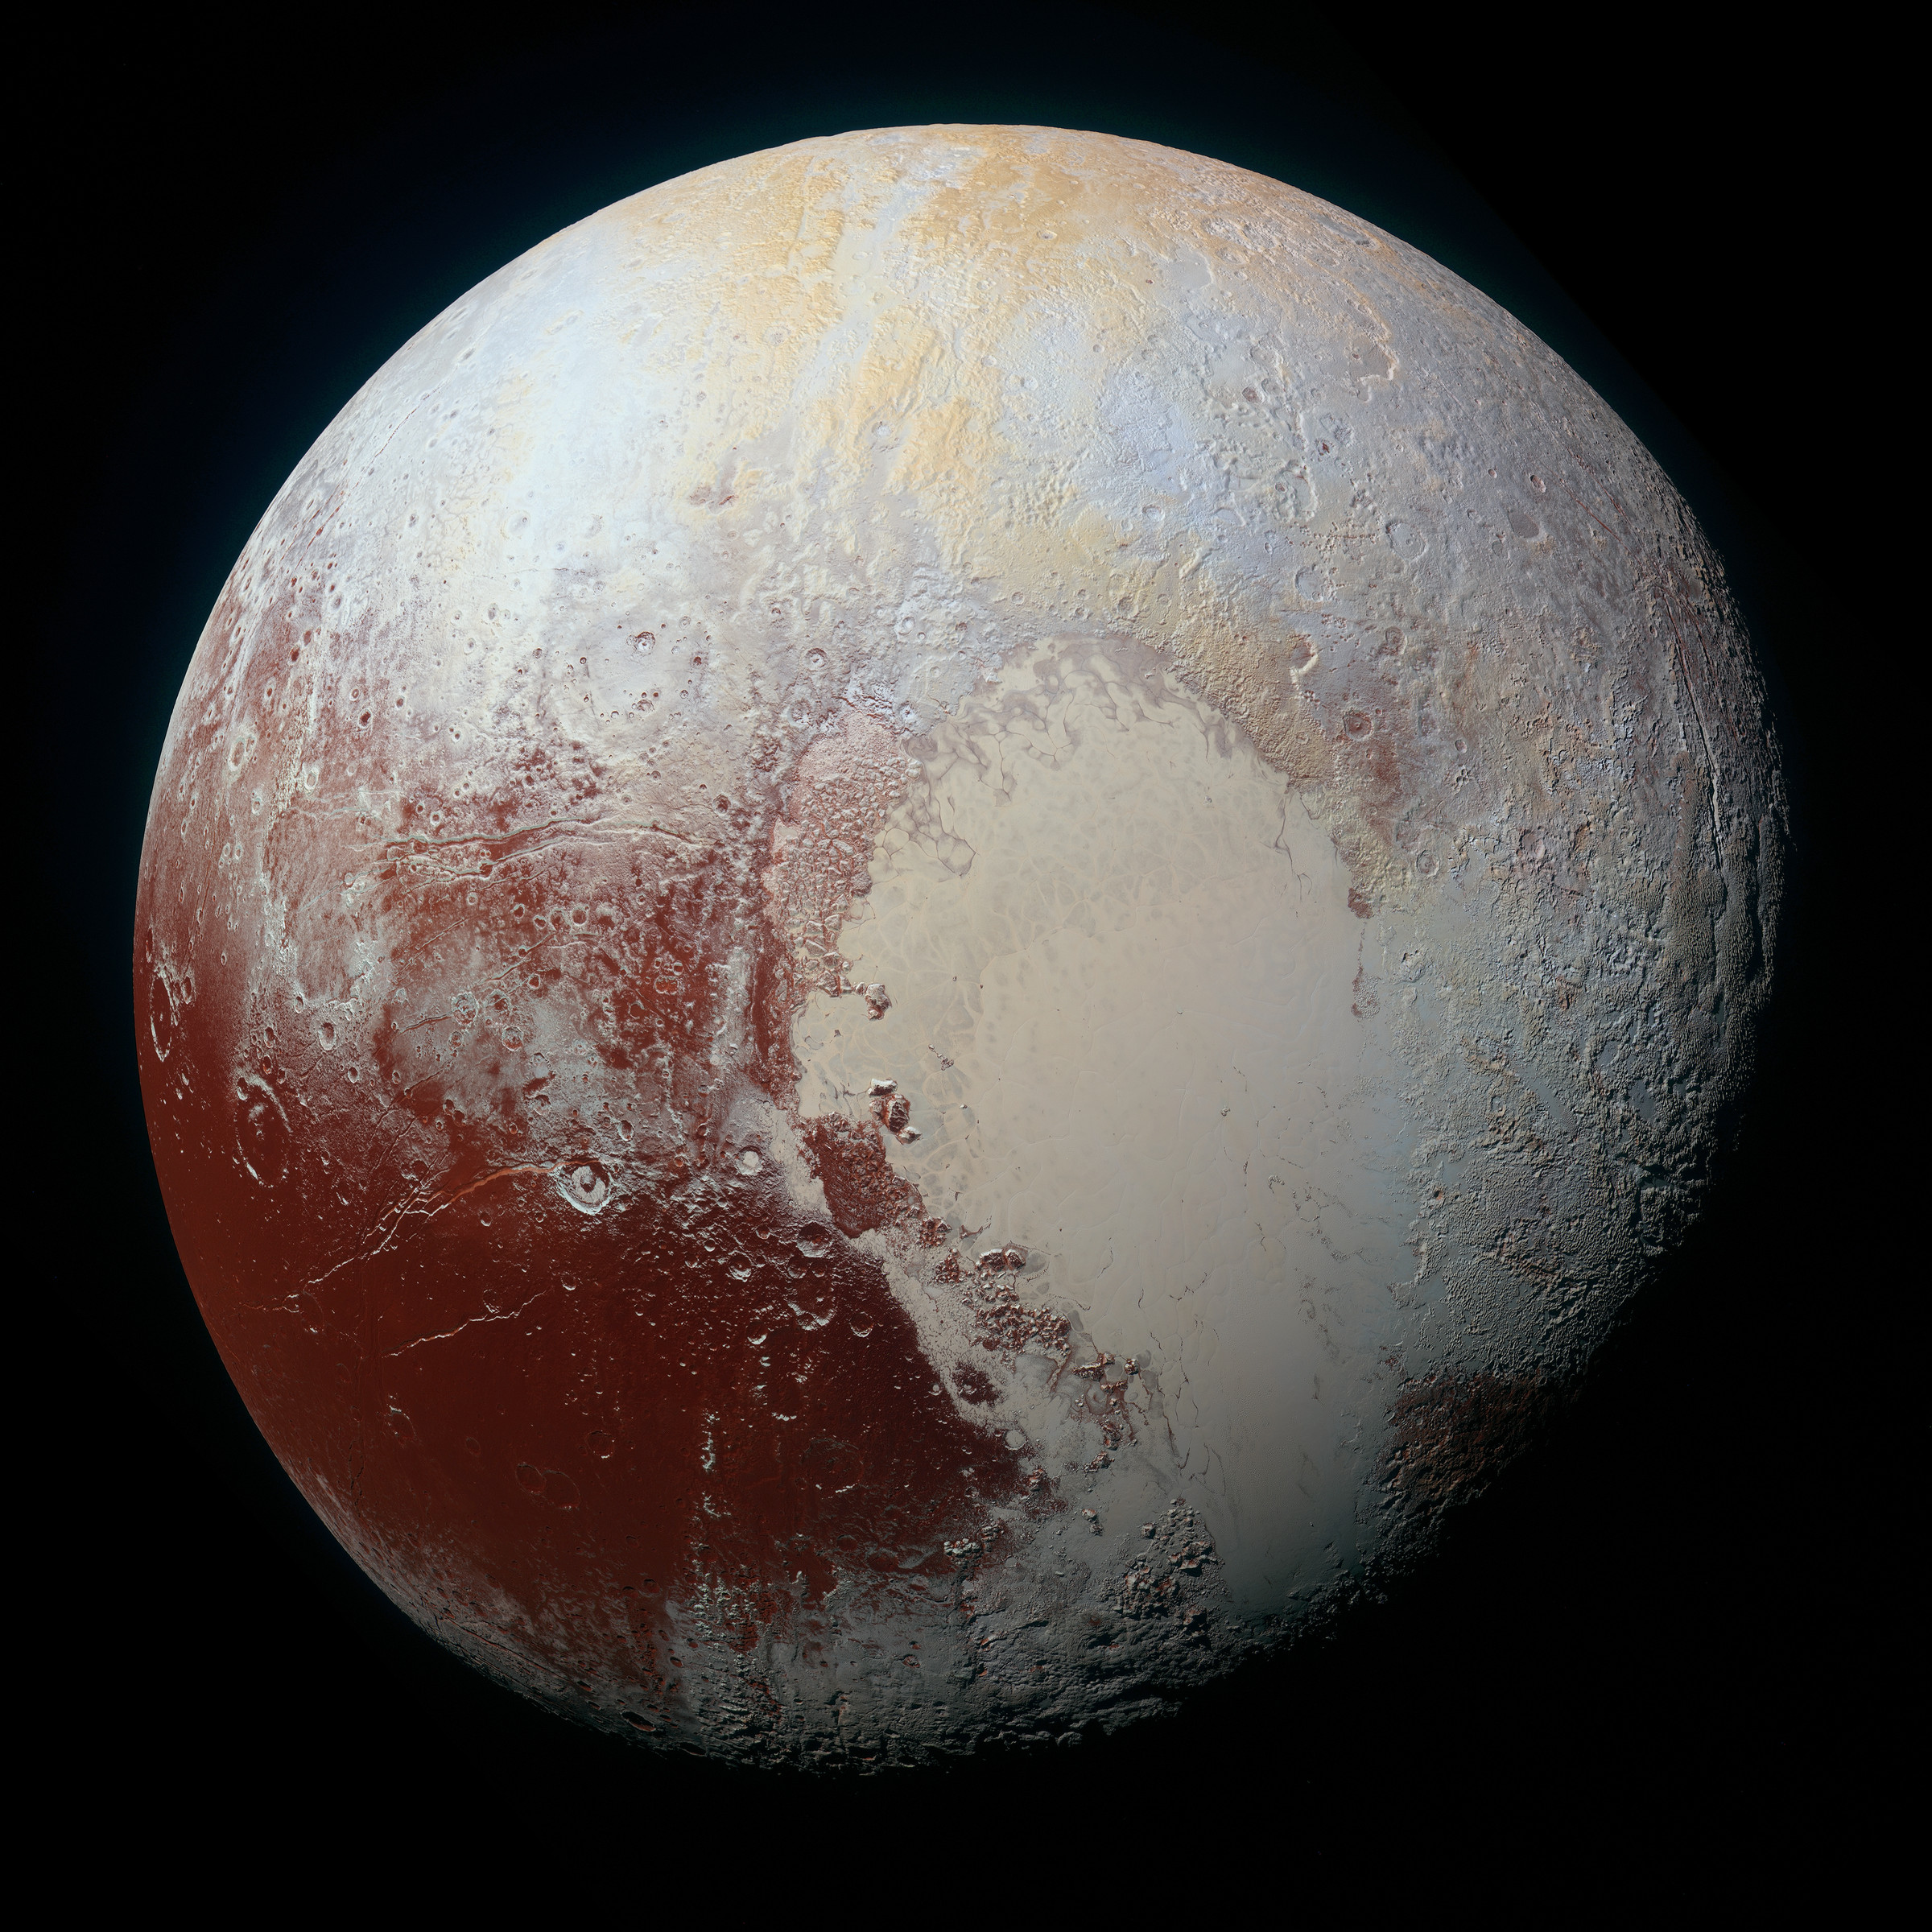 New color images of Pluto from New Horizons